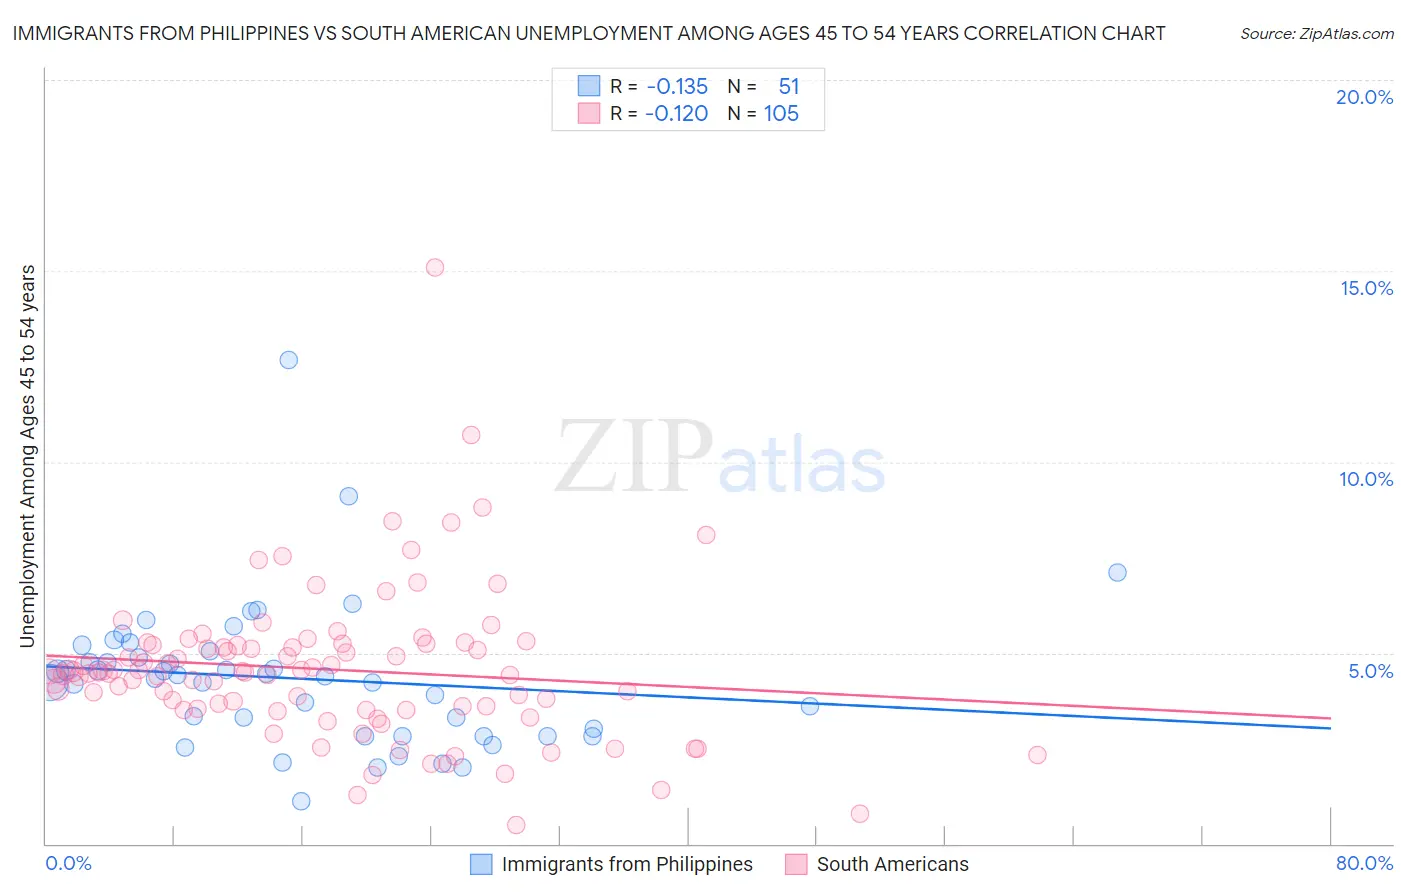 Immigrants from Philippines vs South American Unemployment Among Ages 45 to 54 years